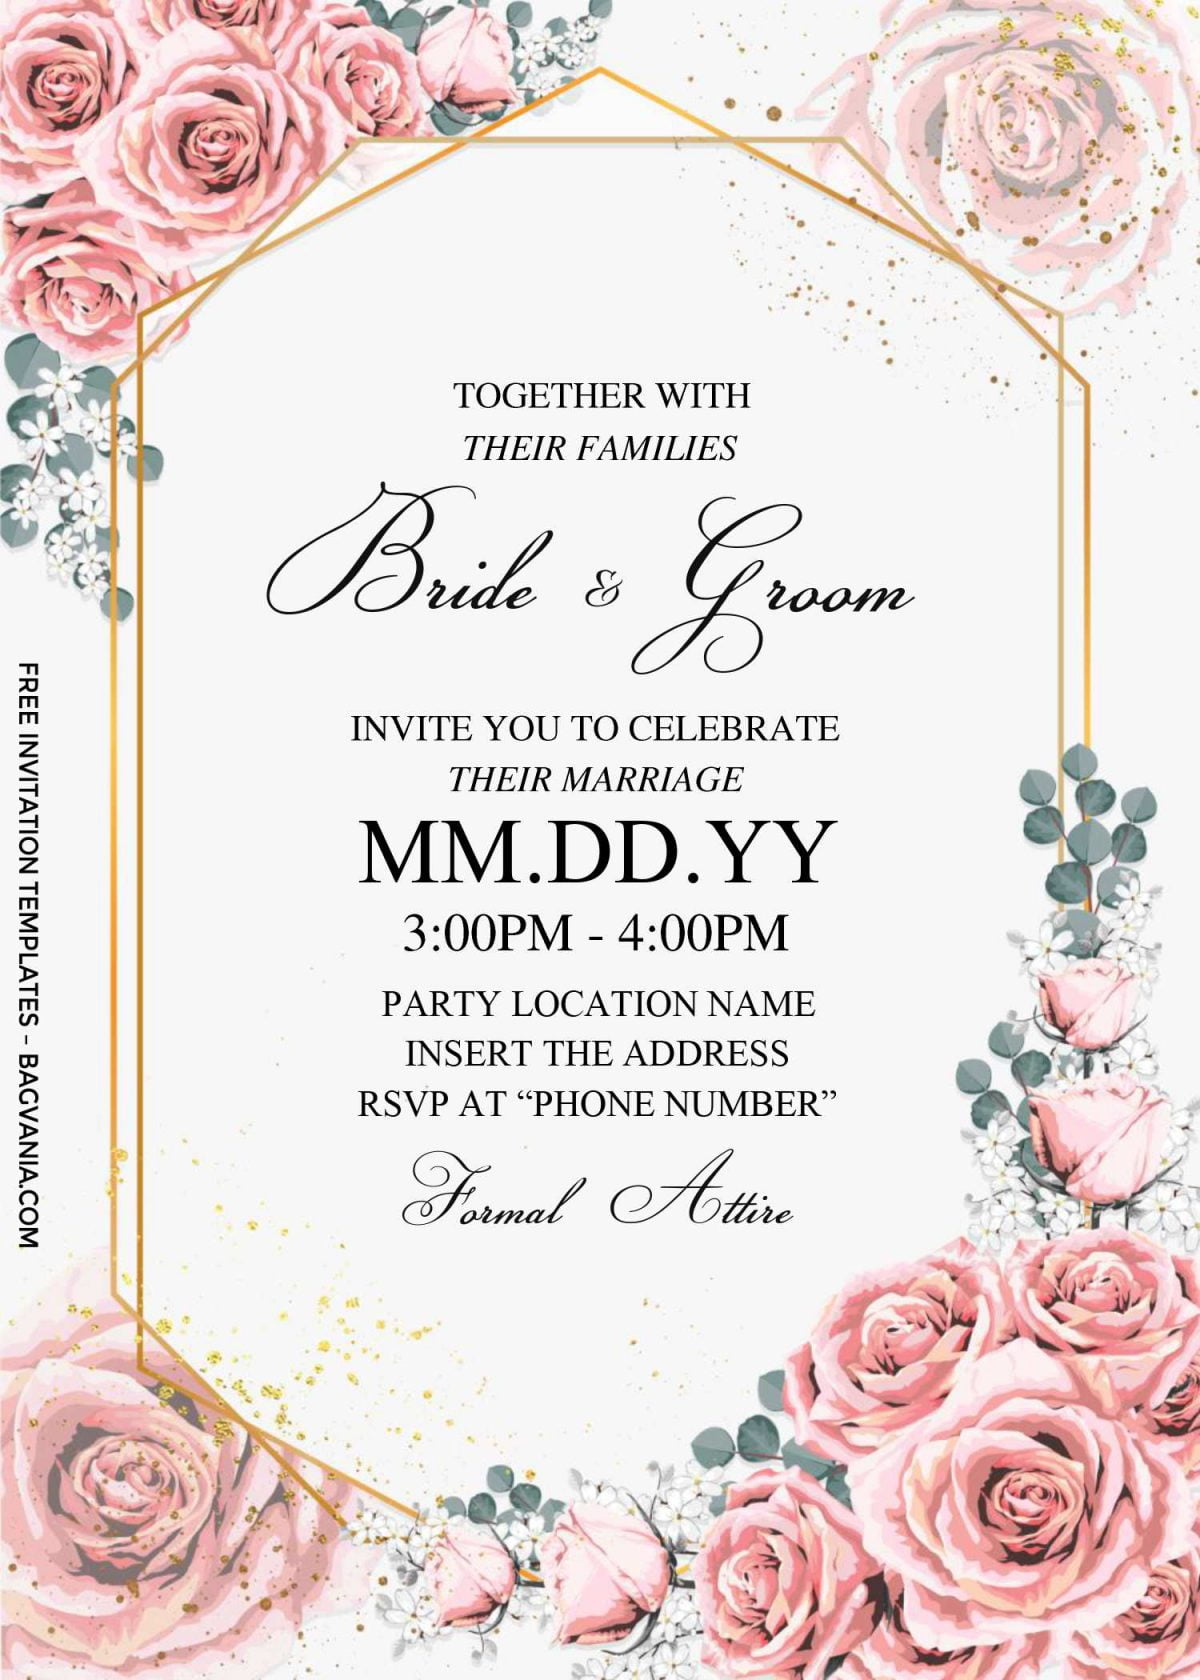 Free Dusty Rose Wedding Invitation Templates For Word and has dazzling metallic gold frame